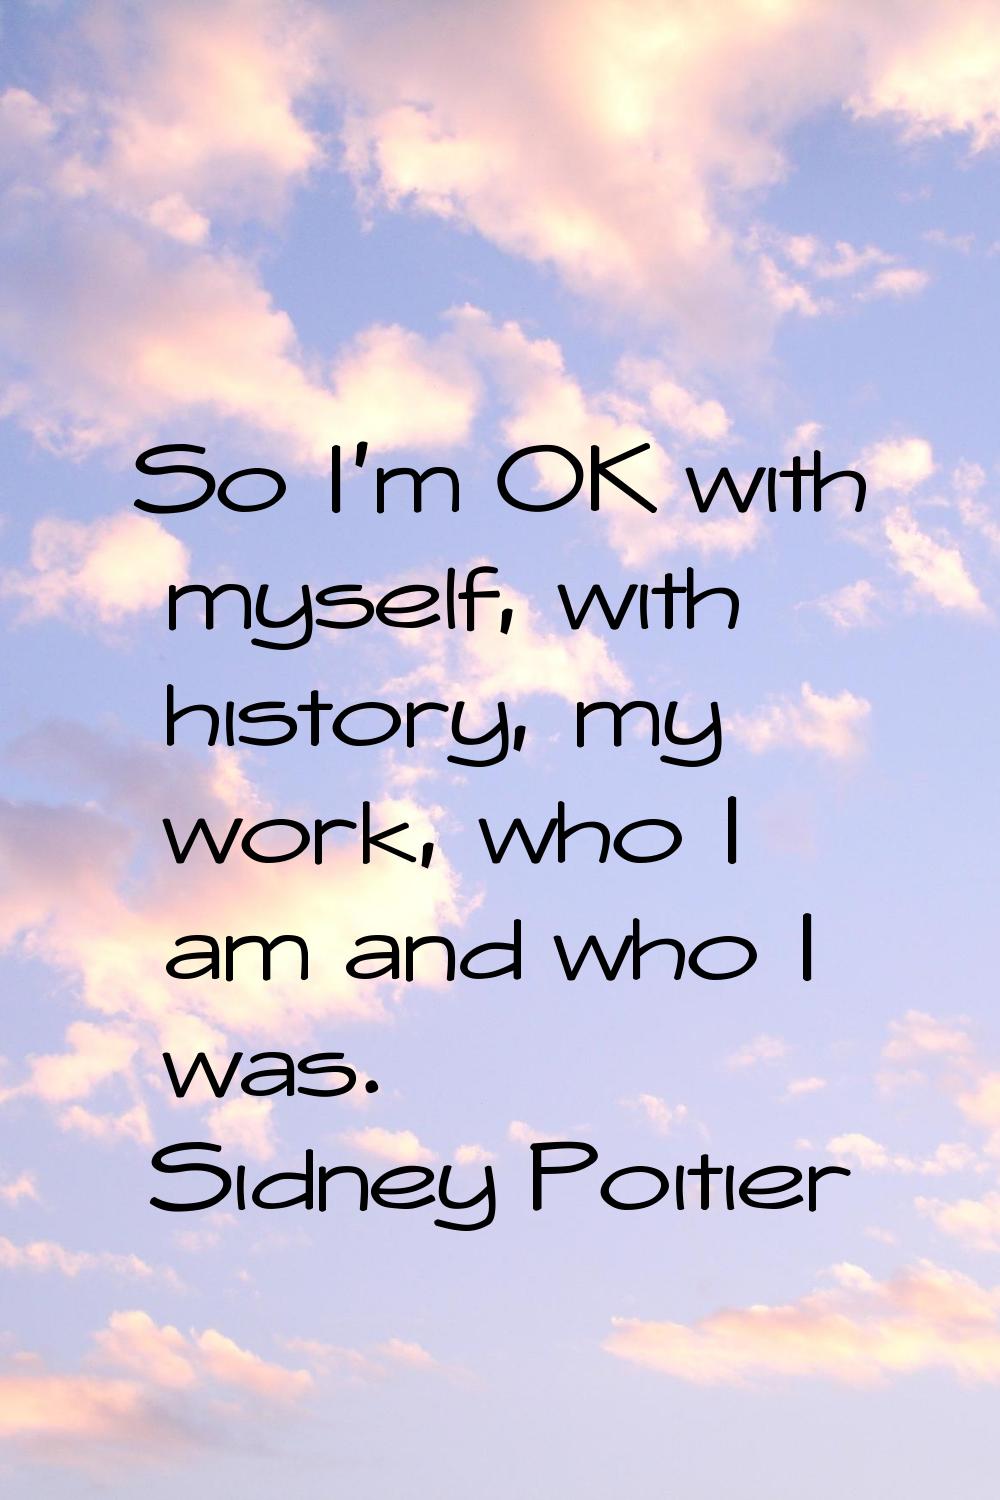 So I'm OK with myself, with history, my work, who I am and who I was.